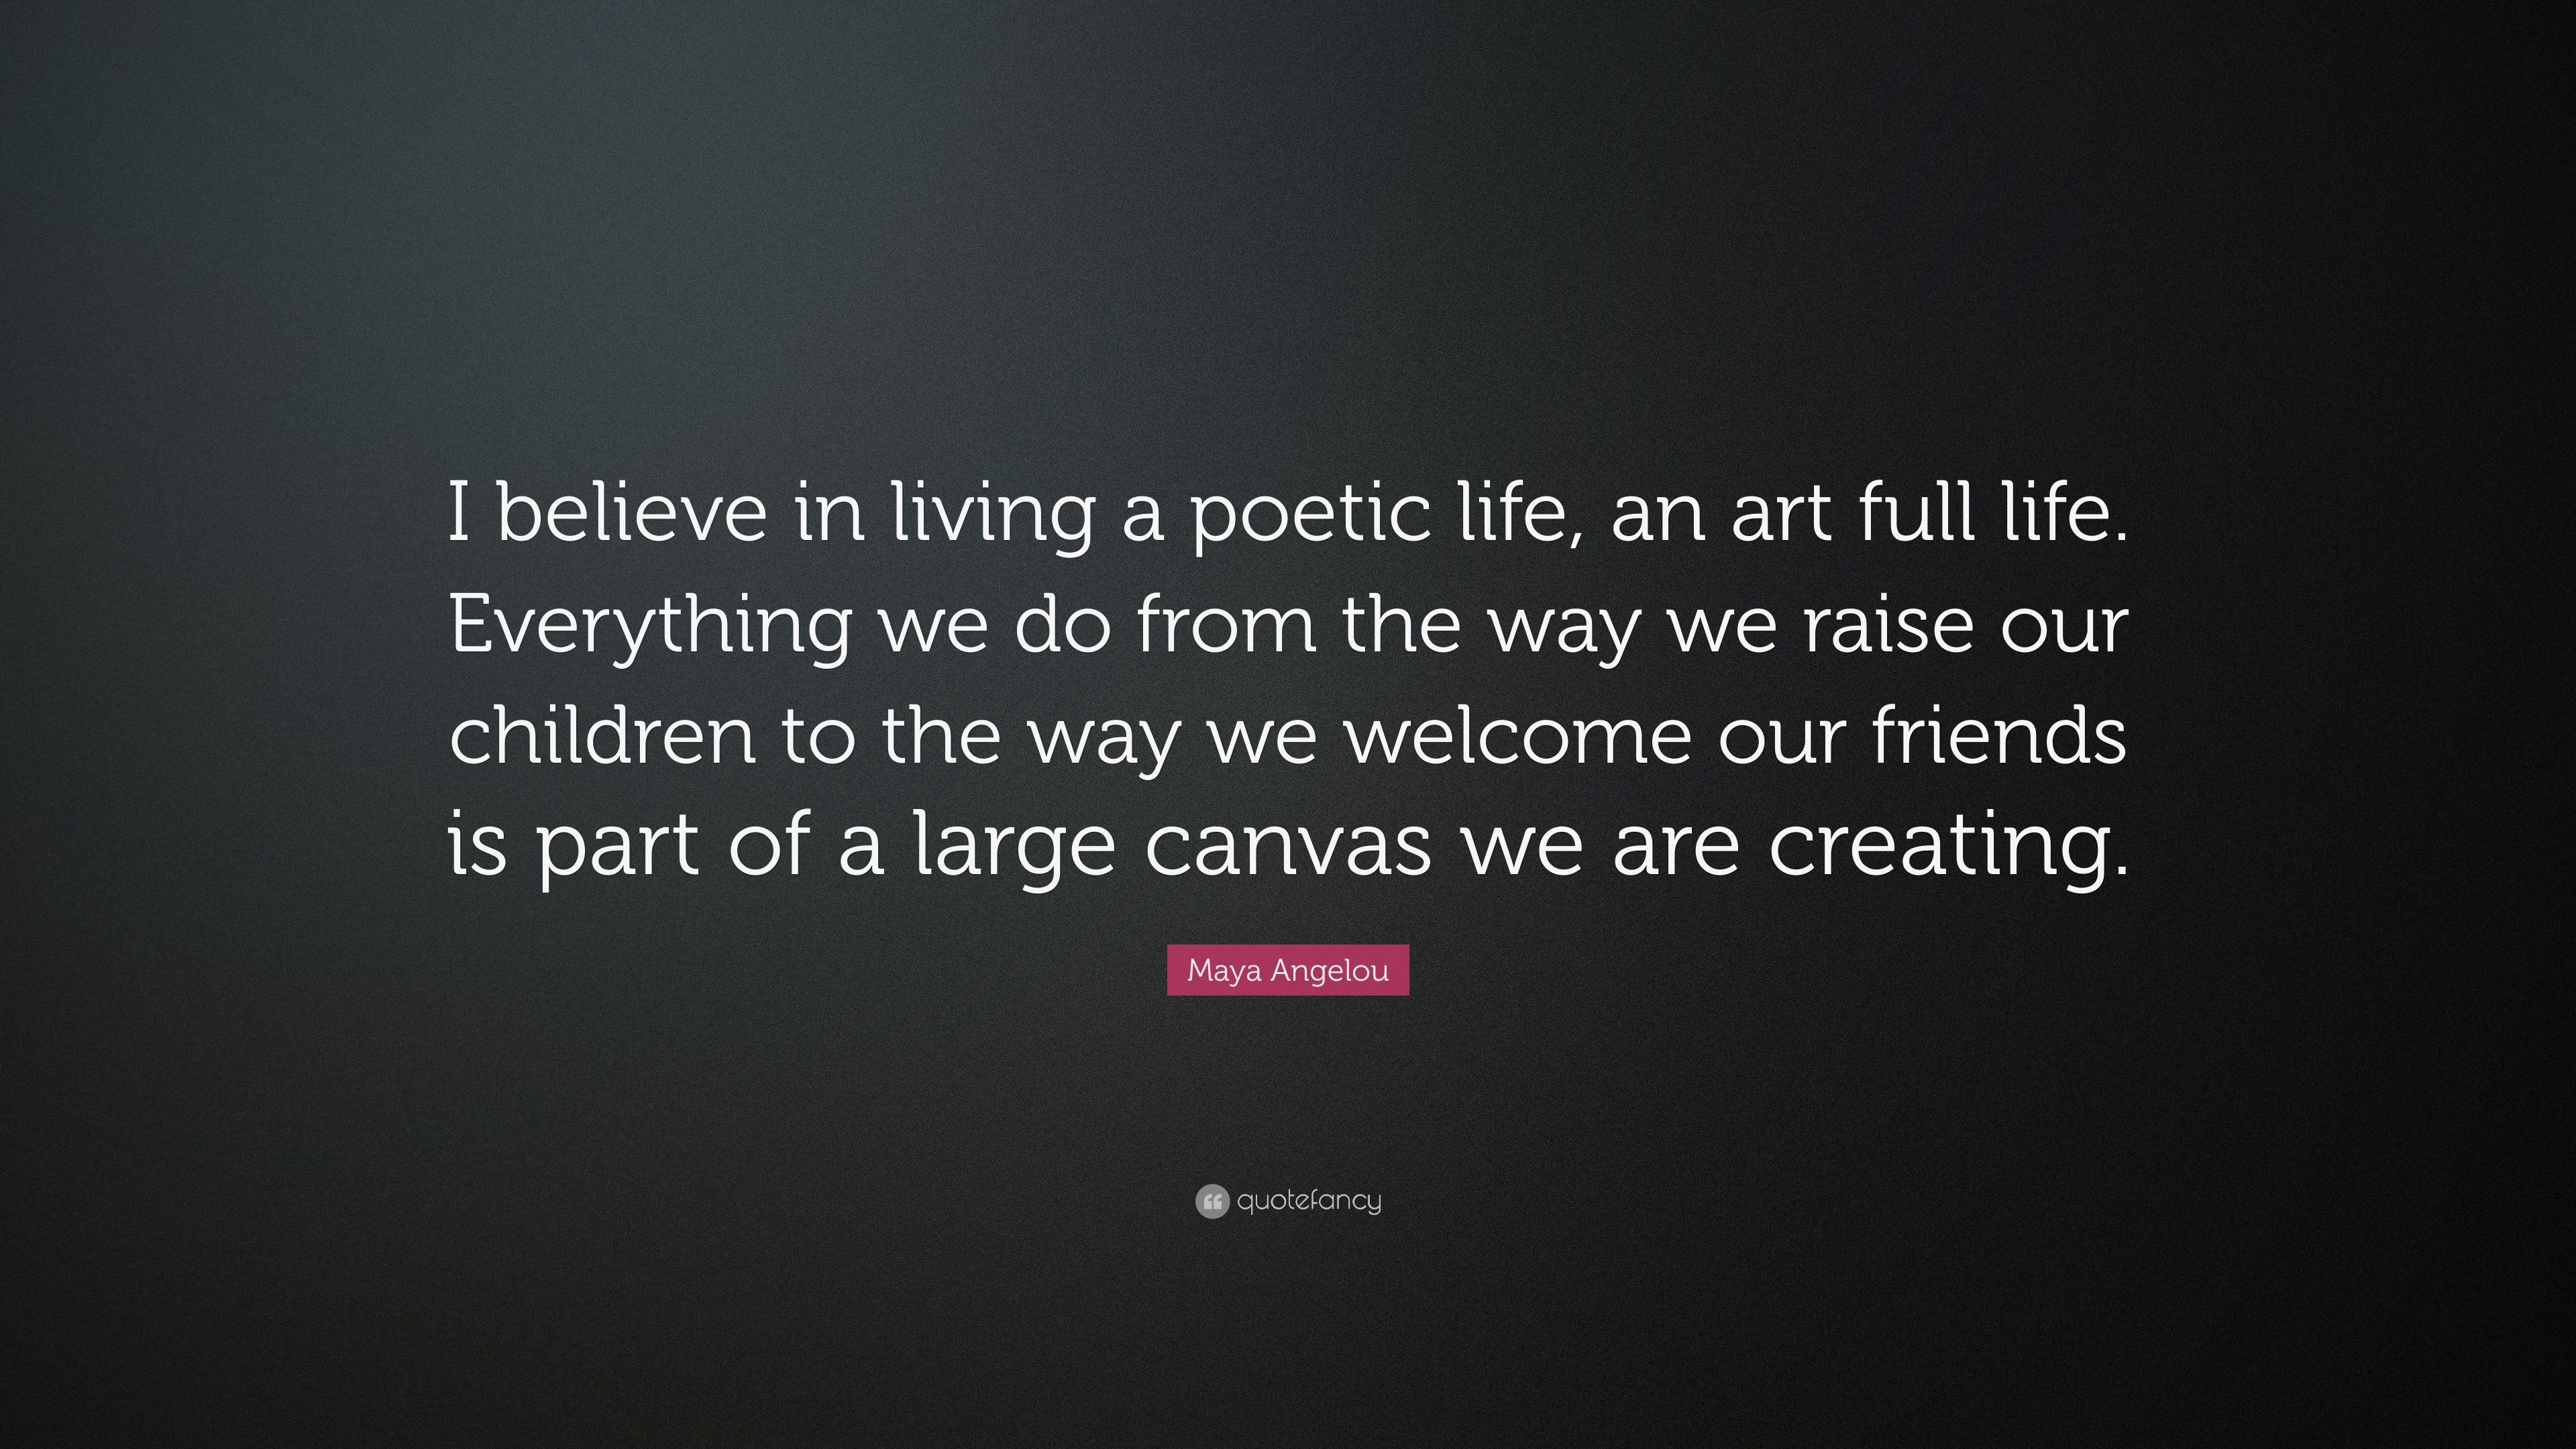 Maya Angelou Quote: “I believe in living a poetic life, an art full life. Everything we do from the way we raise our children to the way we w.” (7 wallpaper)